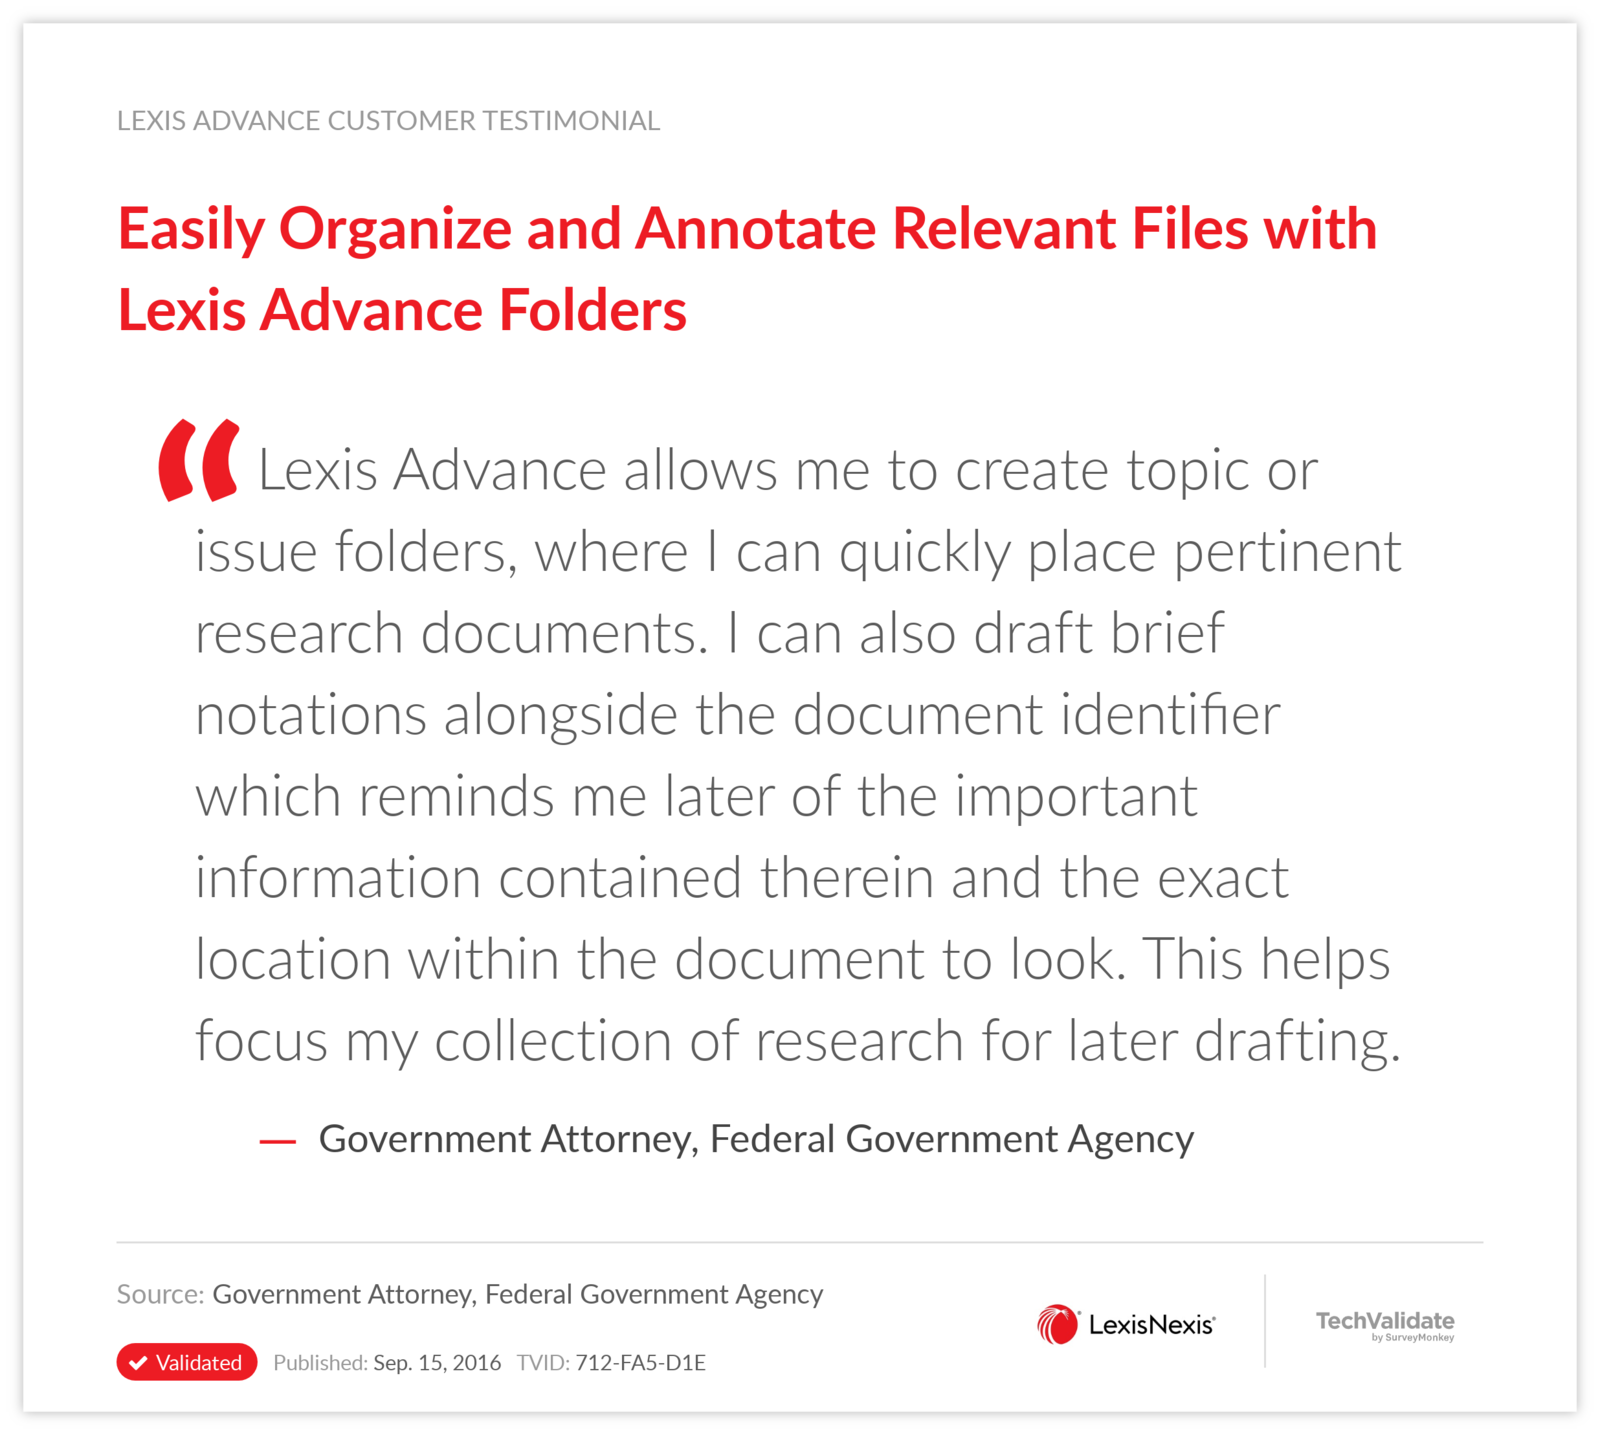 Easily Organize and Annotate Relevant Files with Lexis Advance Folders